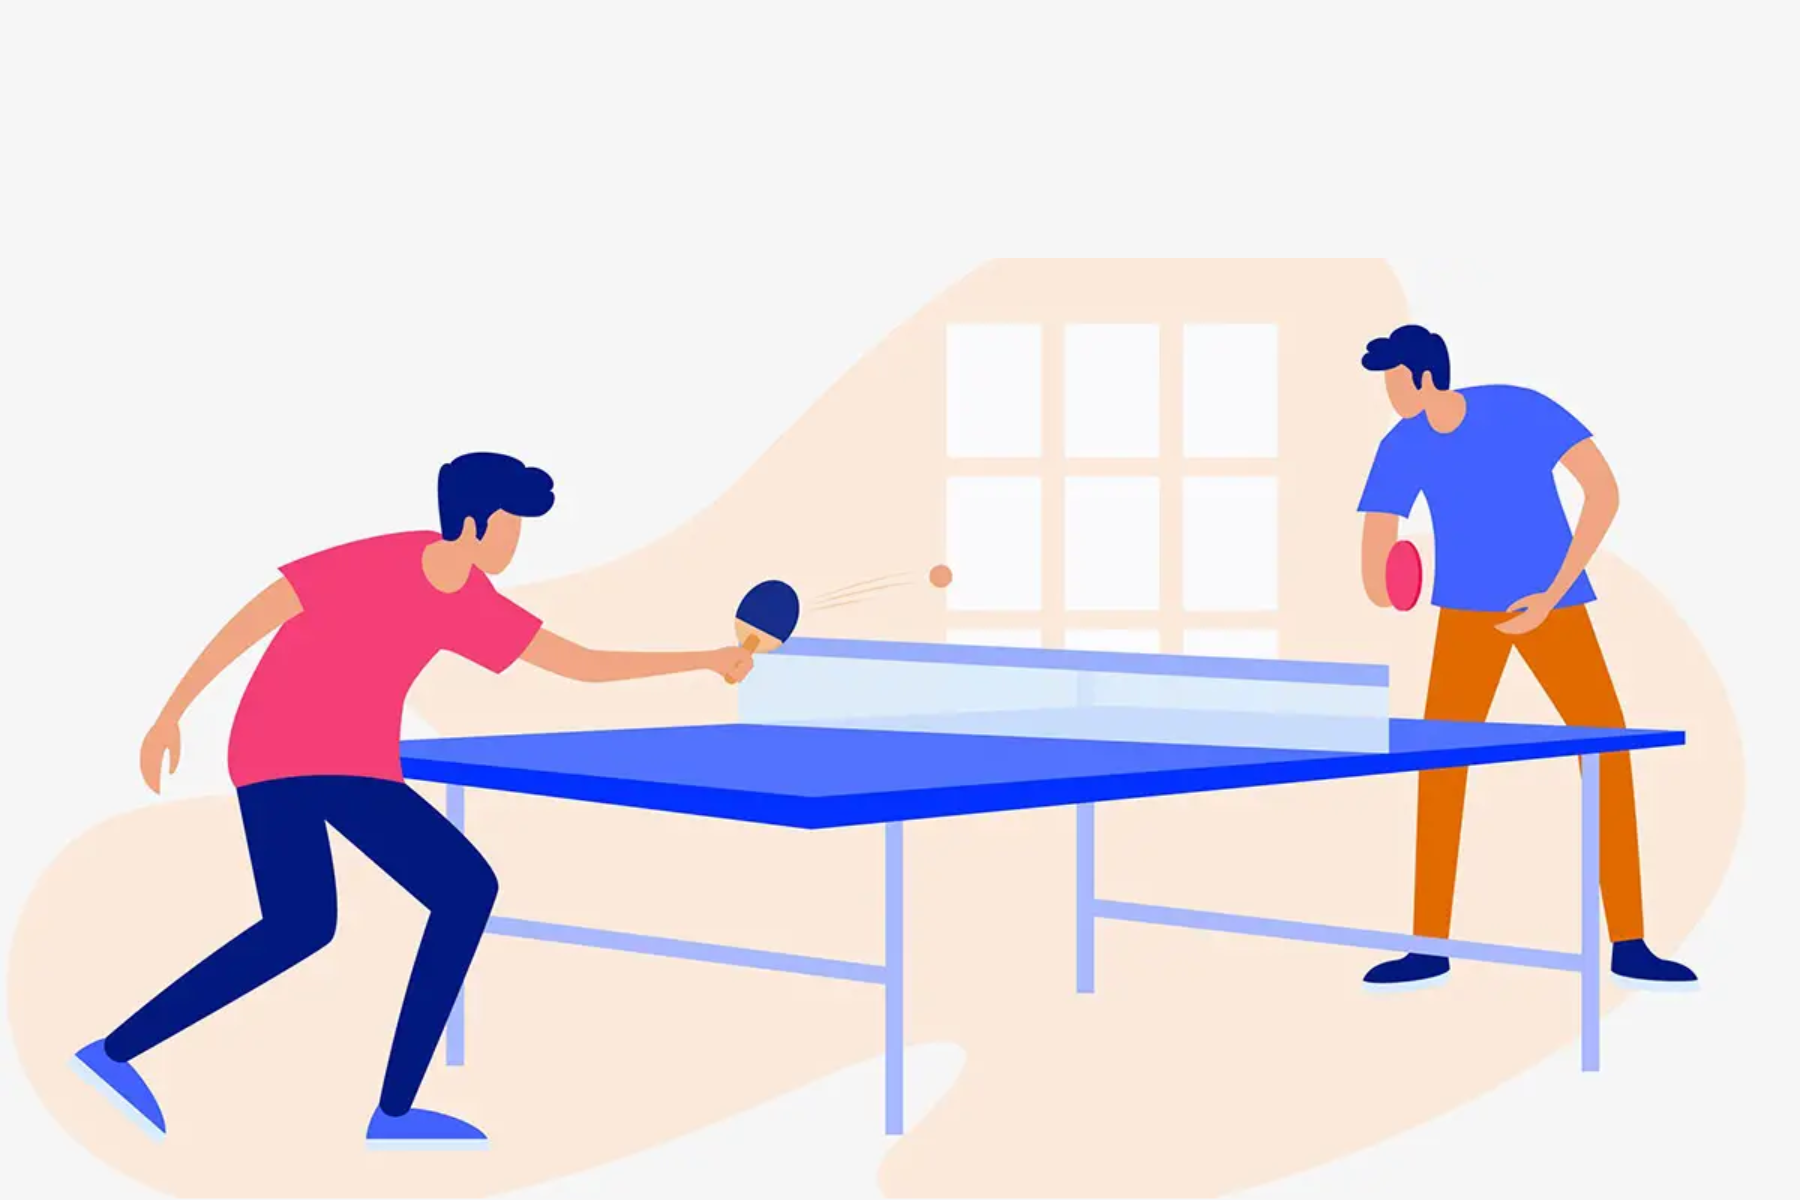 Two men are playing ping-pong on a ping-pong table in a room